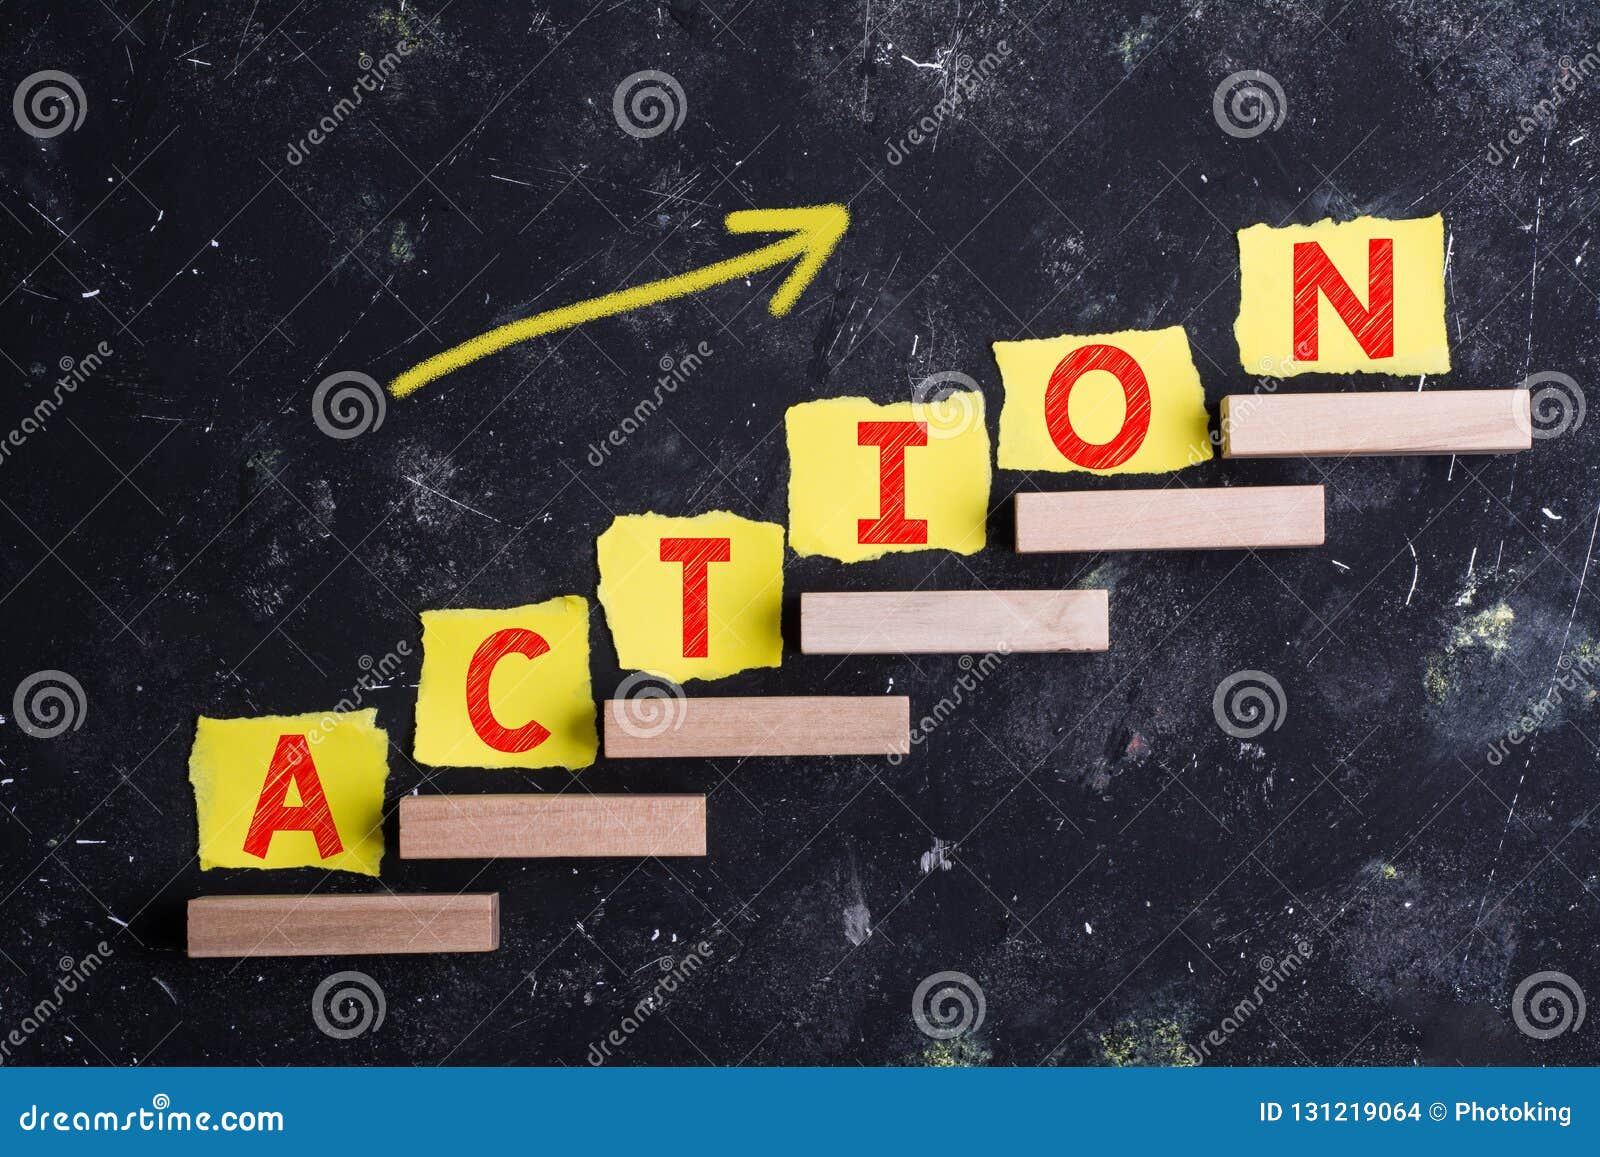 action word on steps